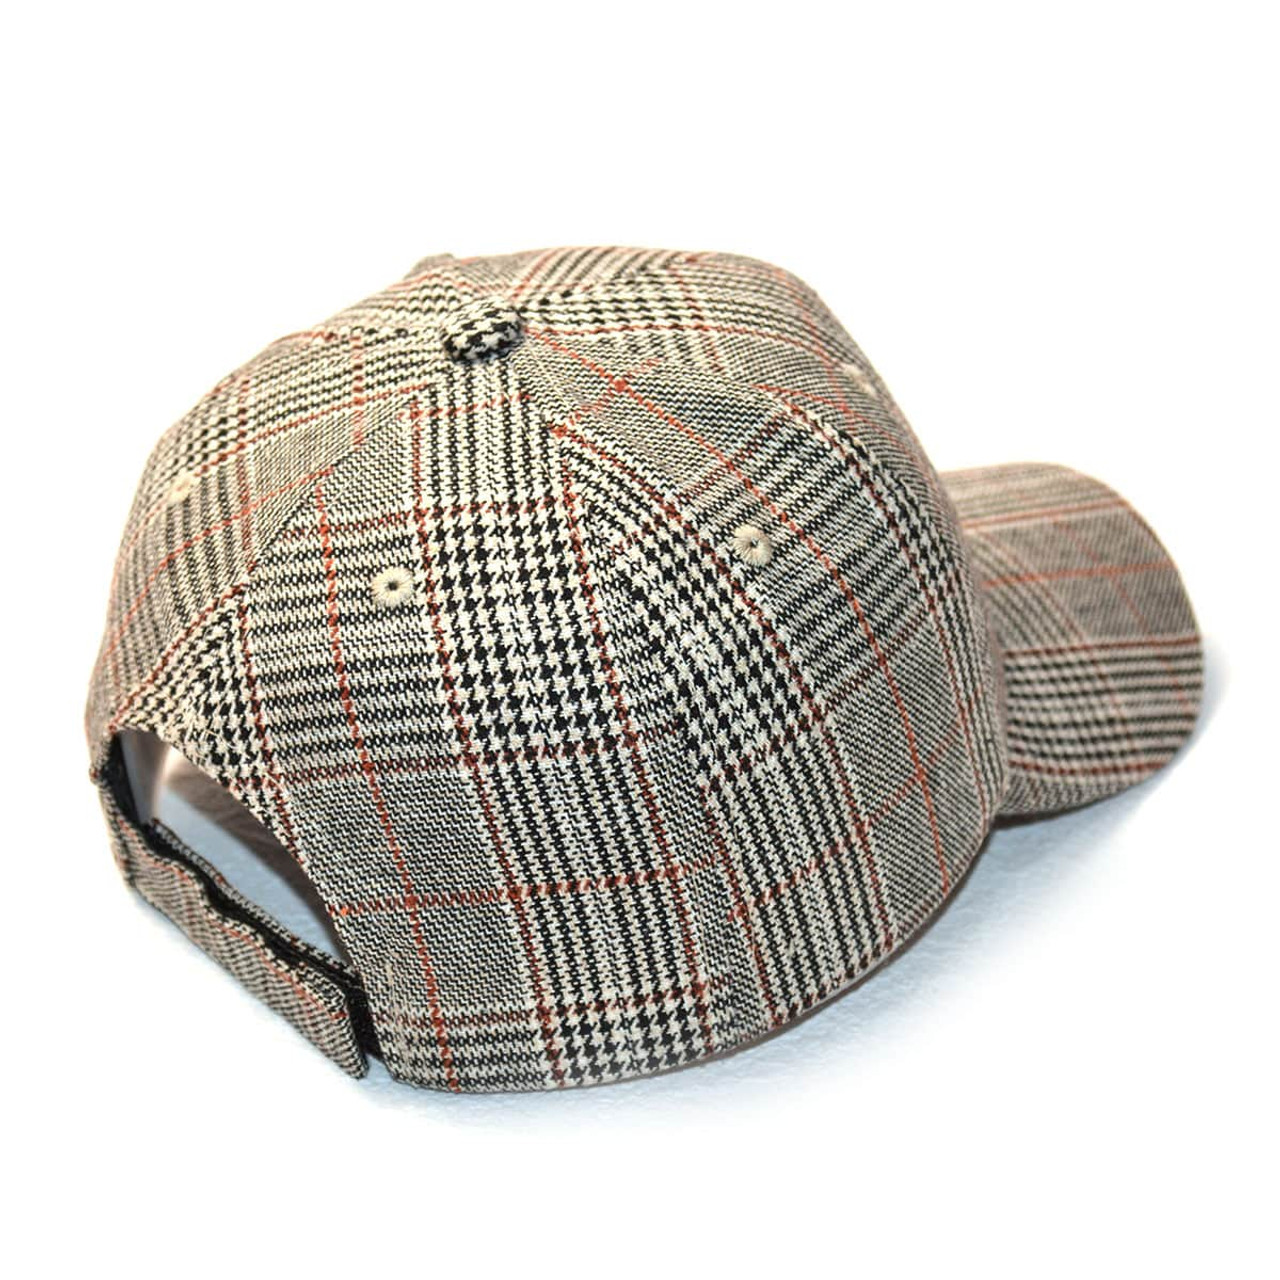 Vintage Bird Plaid Blended Knitted Baseball Cap Spring And Autumn Fashion